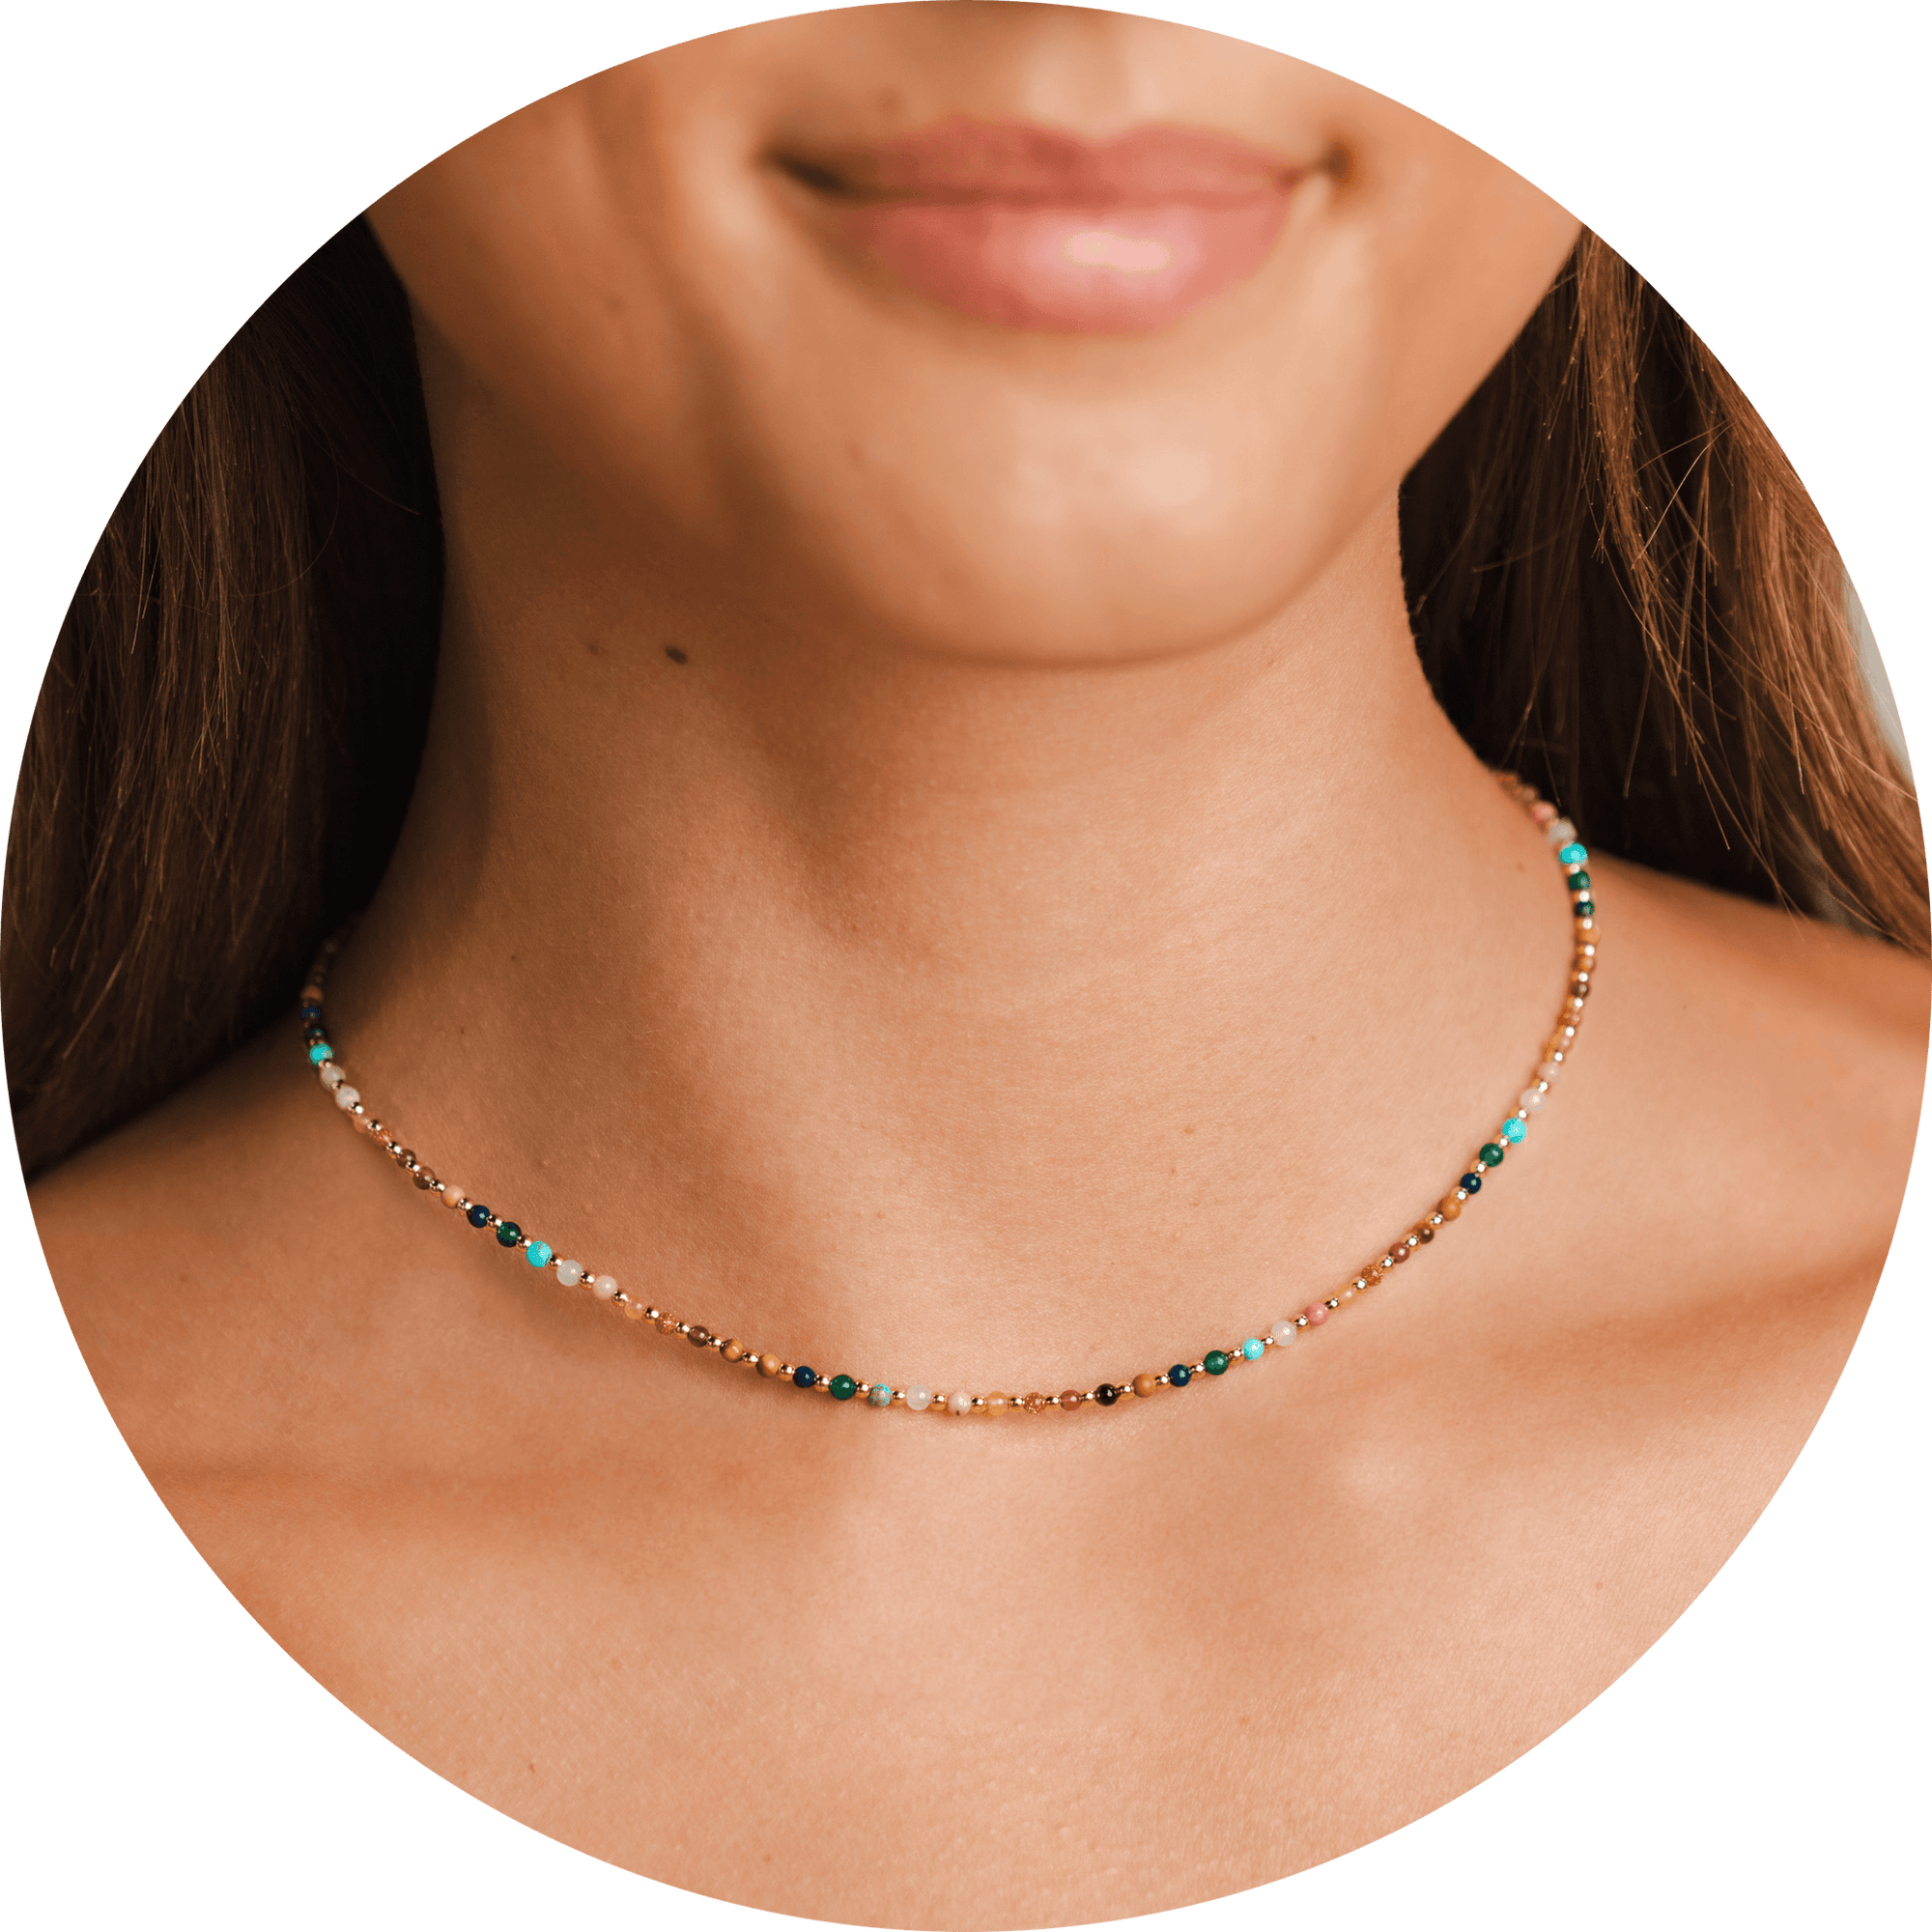 Model wearing a matching healing bracelet and necklace set. The set includes a 2mm multicolor stone and gold stone healing necklace and  2mm multicolor stone and gold bead healing bracelet with an attached dainty gold chain 